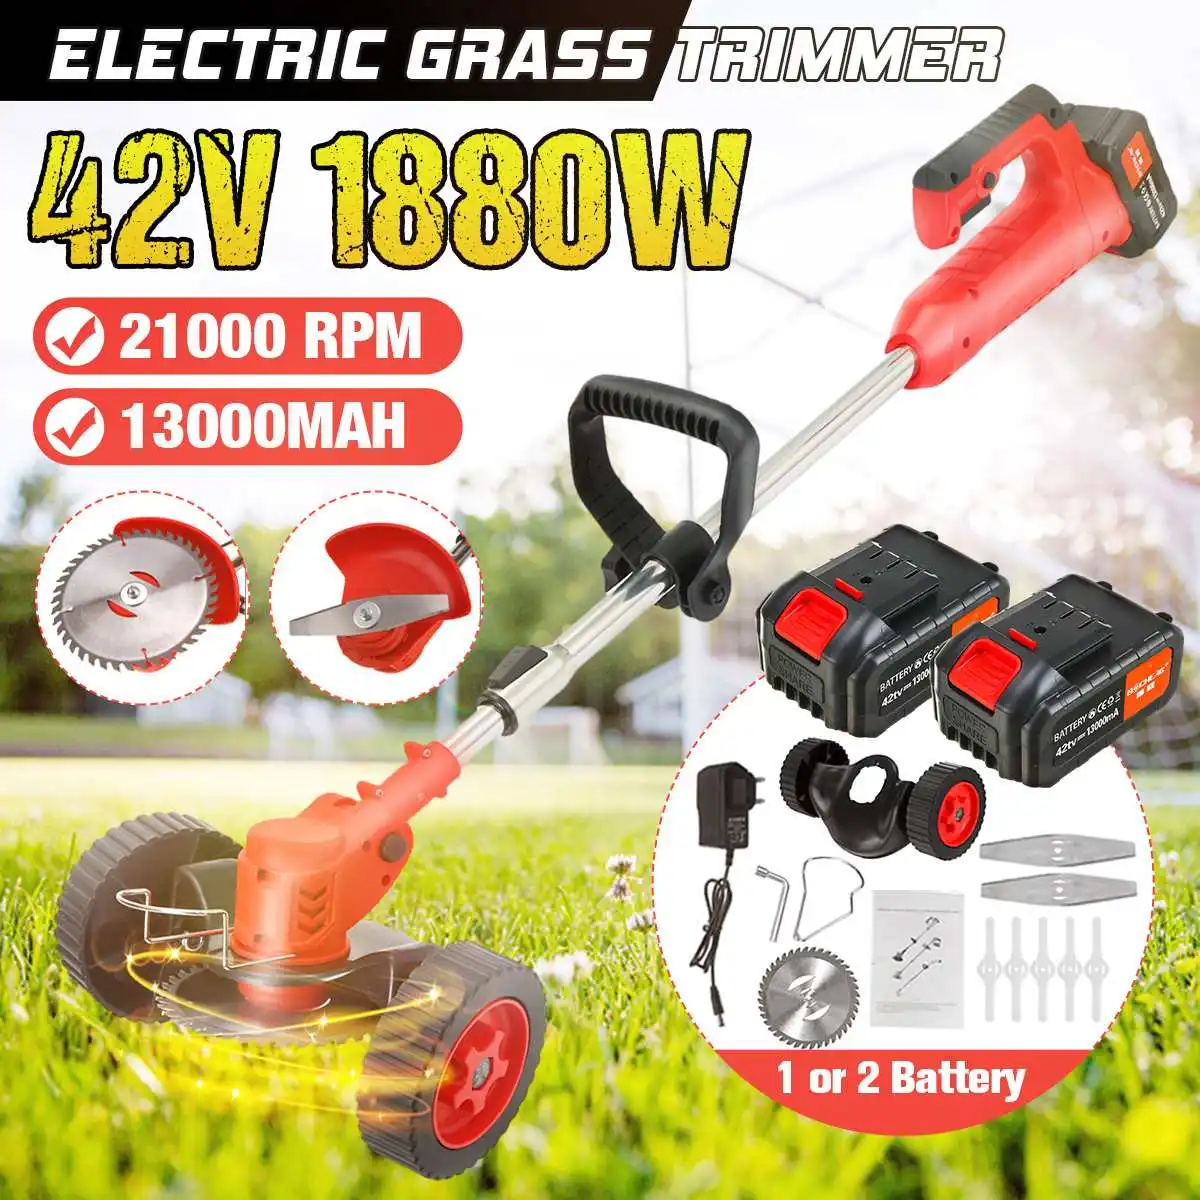 42V Electric Cordless Grass Trimmer 1880W 13000mAh Lawn Mower Hedge Trimmer Adjustable Handheld Garden Pruning Power Tools